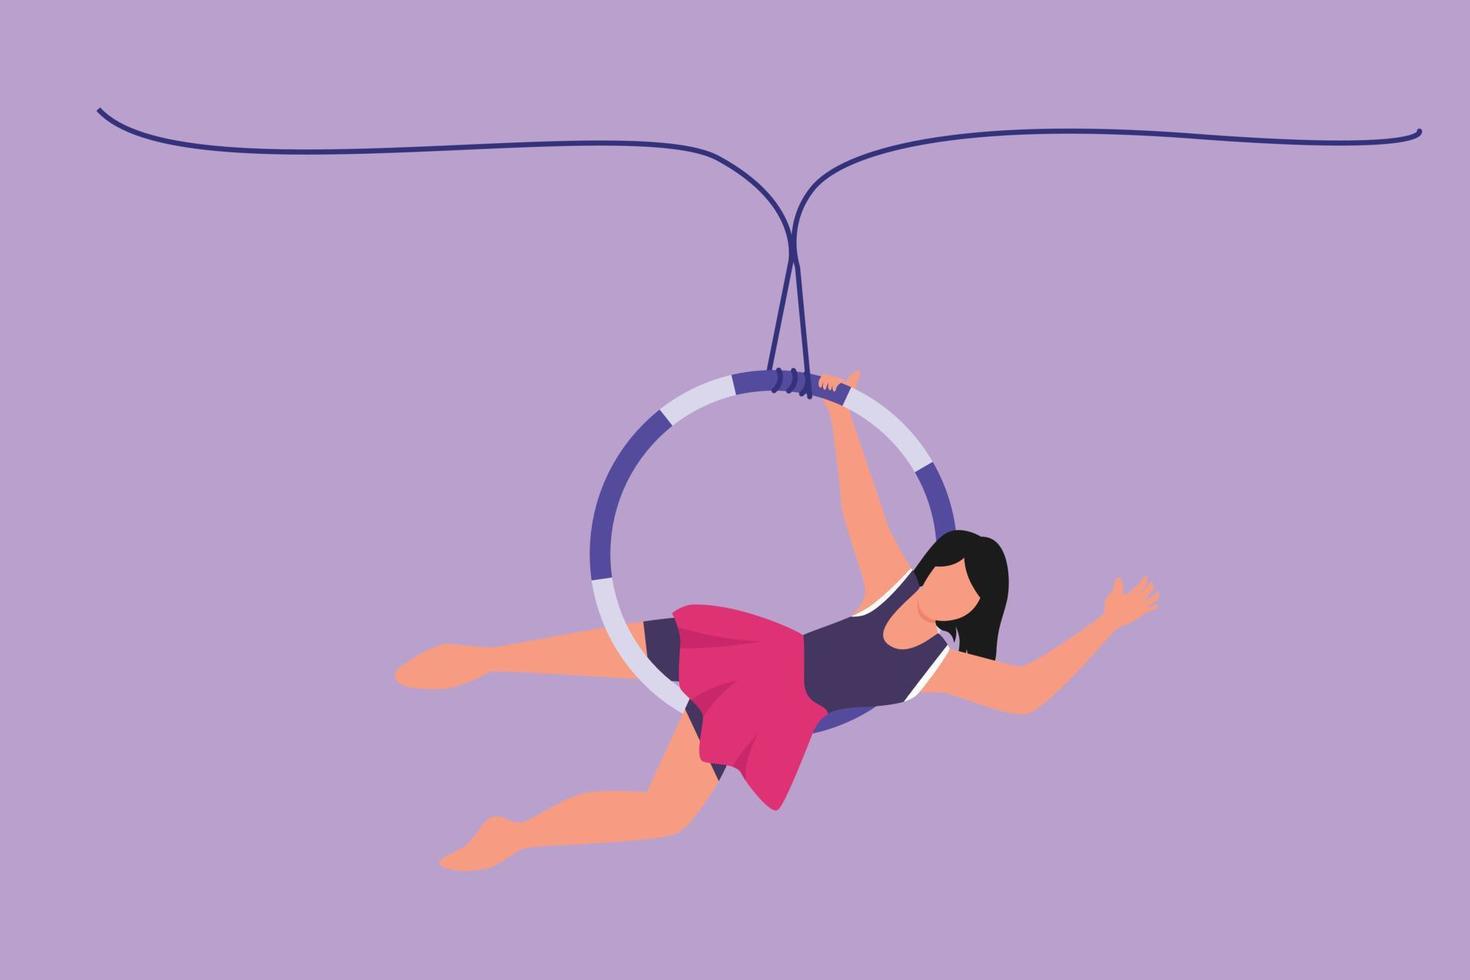 Cartoon flat style drawing young female acrobat who performs on an aerial hoop by hanging on to one hand and straightening her body. Circus show event entertainment. Graphic design vector illustration